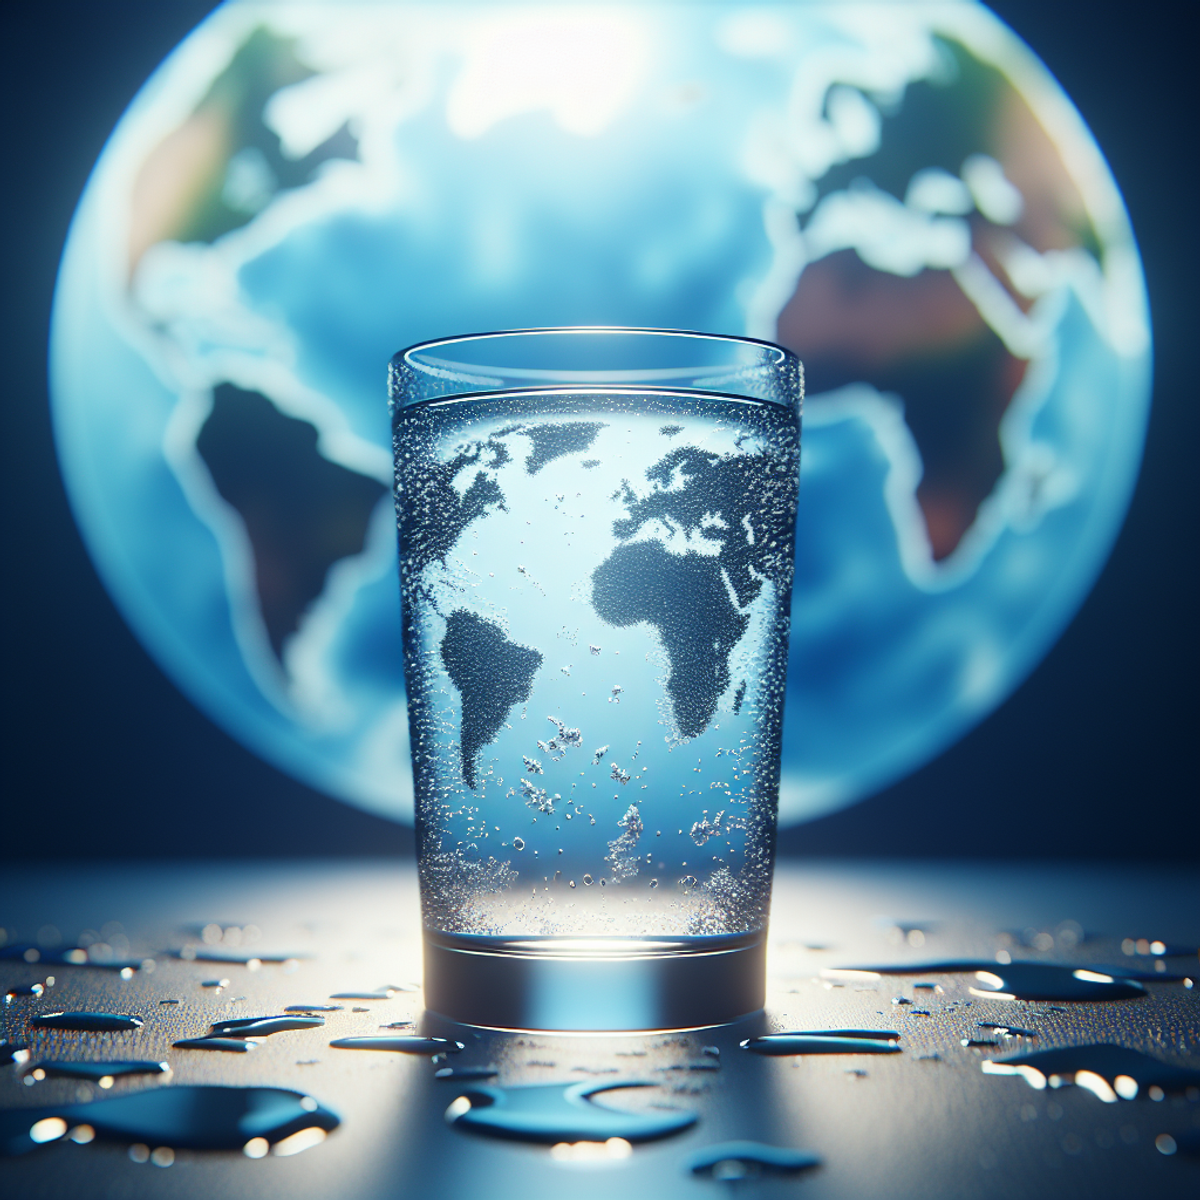 Glass of water on reflective surface with world map in background.